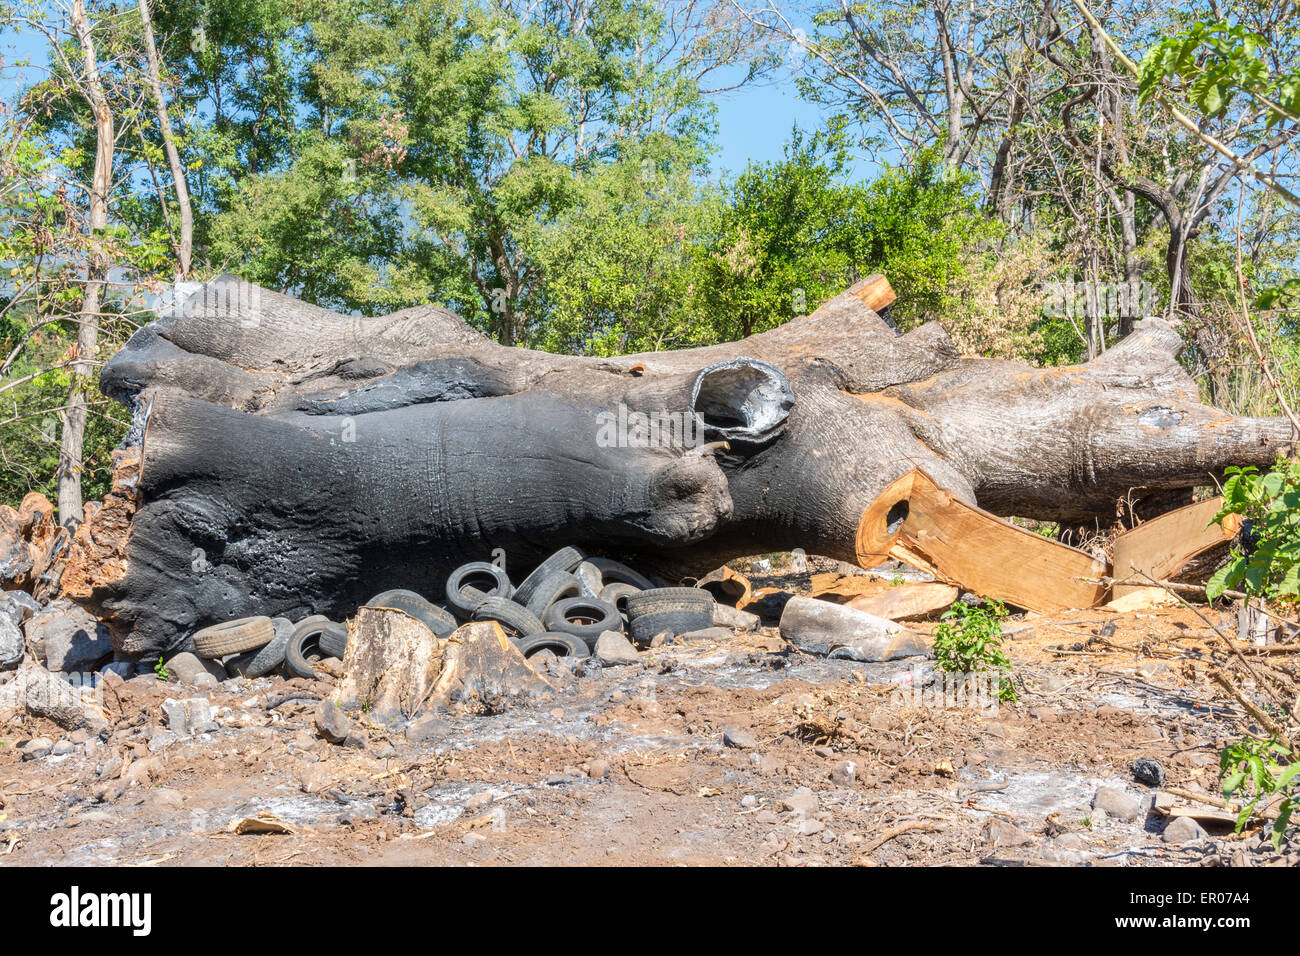 Ceiba tree cut down and being burned in Guatemala Stock Photo